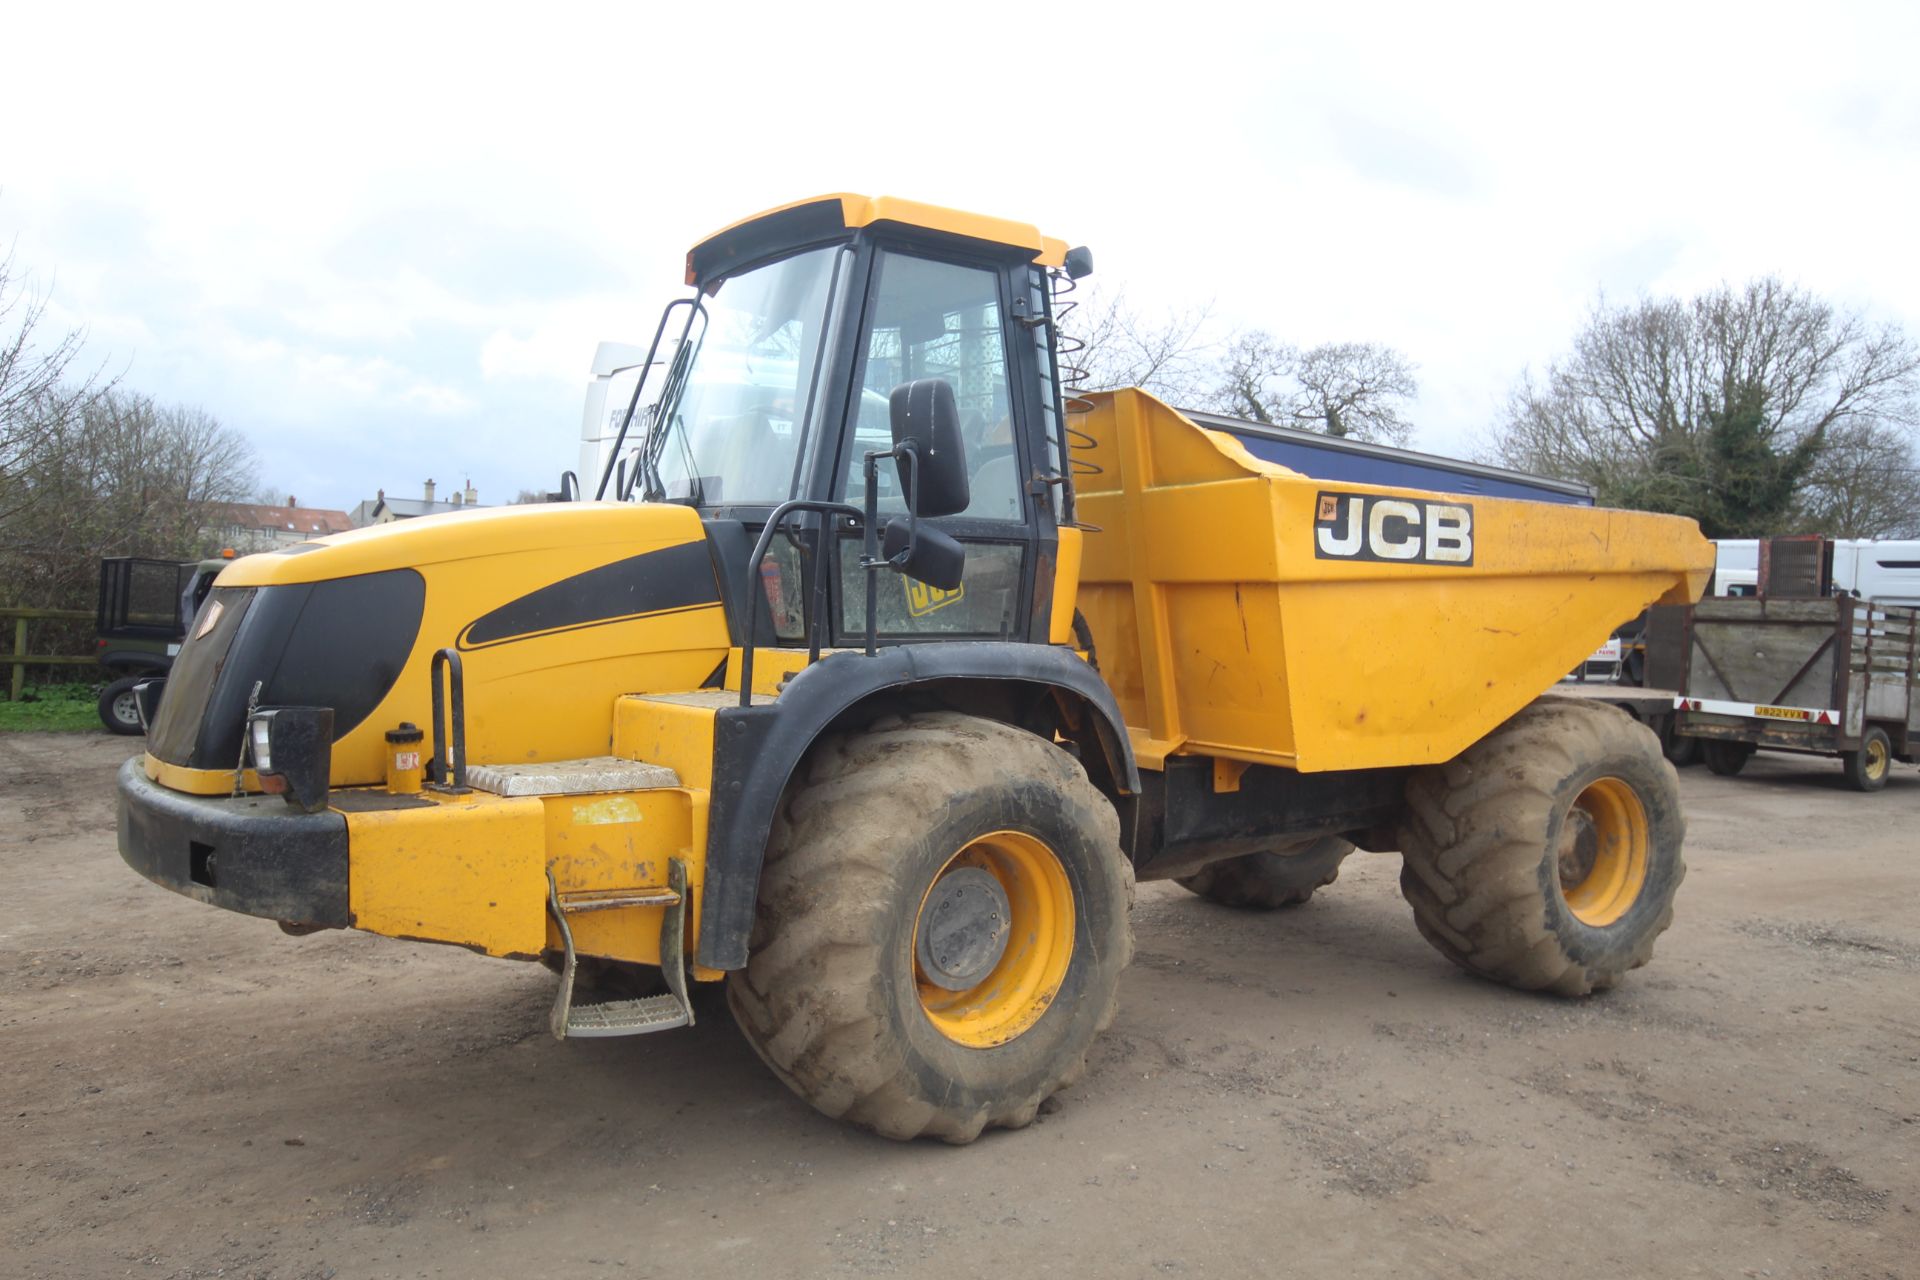 JCB 714 14T 4WD dumper. 2006. 6,088 hours. Serial number SLP714AT6EO830370. Owned from new. Key